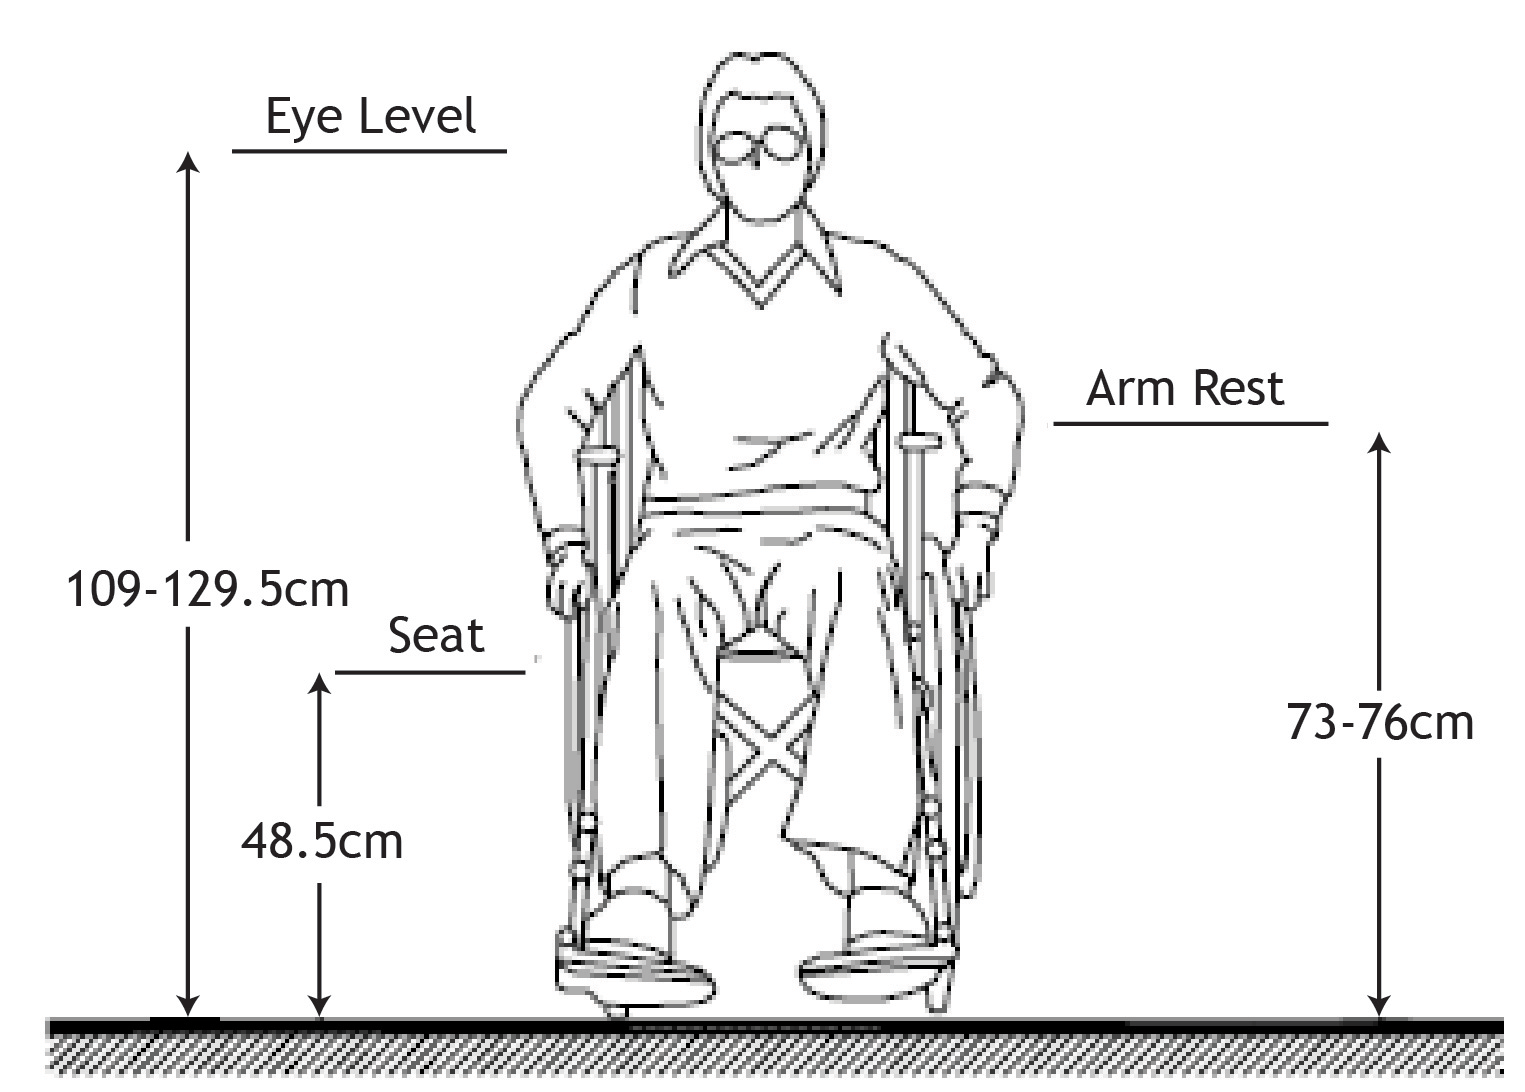 Fig. 20.21 Wheelchair dimensions and the anthropometric measurements indicated in the preceding diagrams should be considered in sizing the backrest.